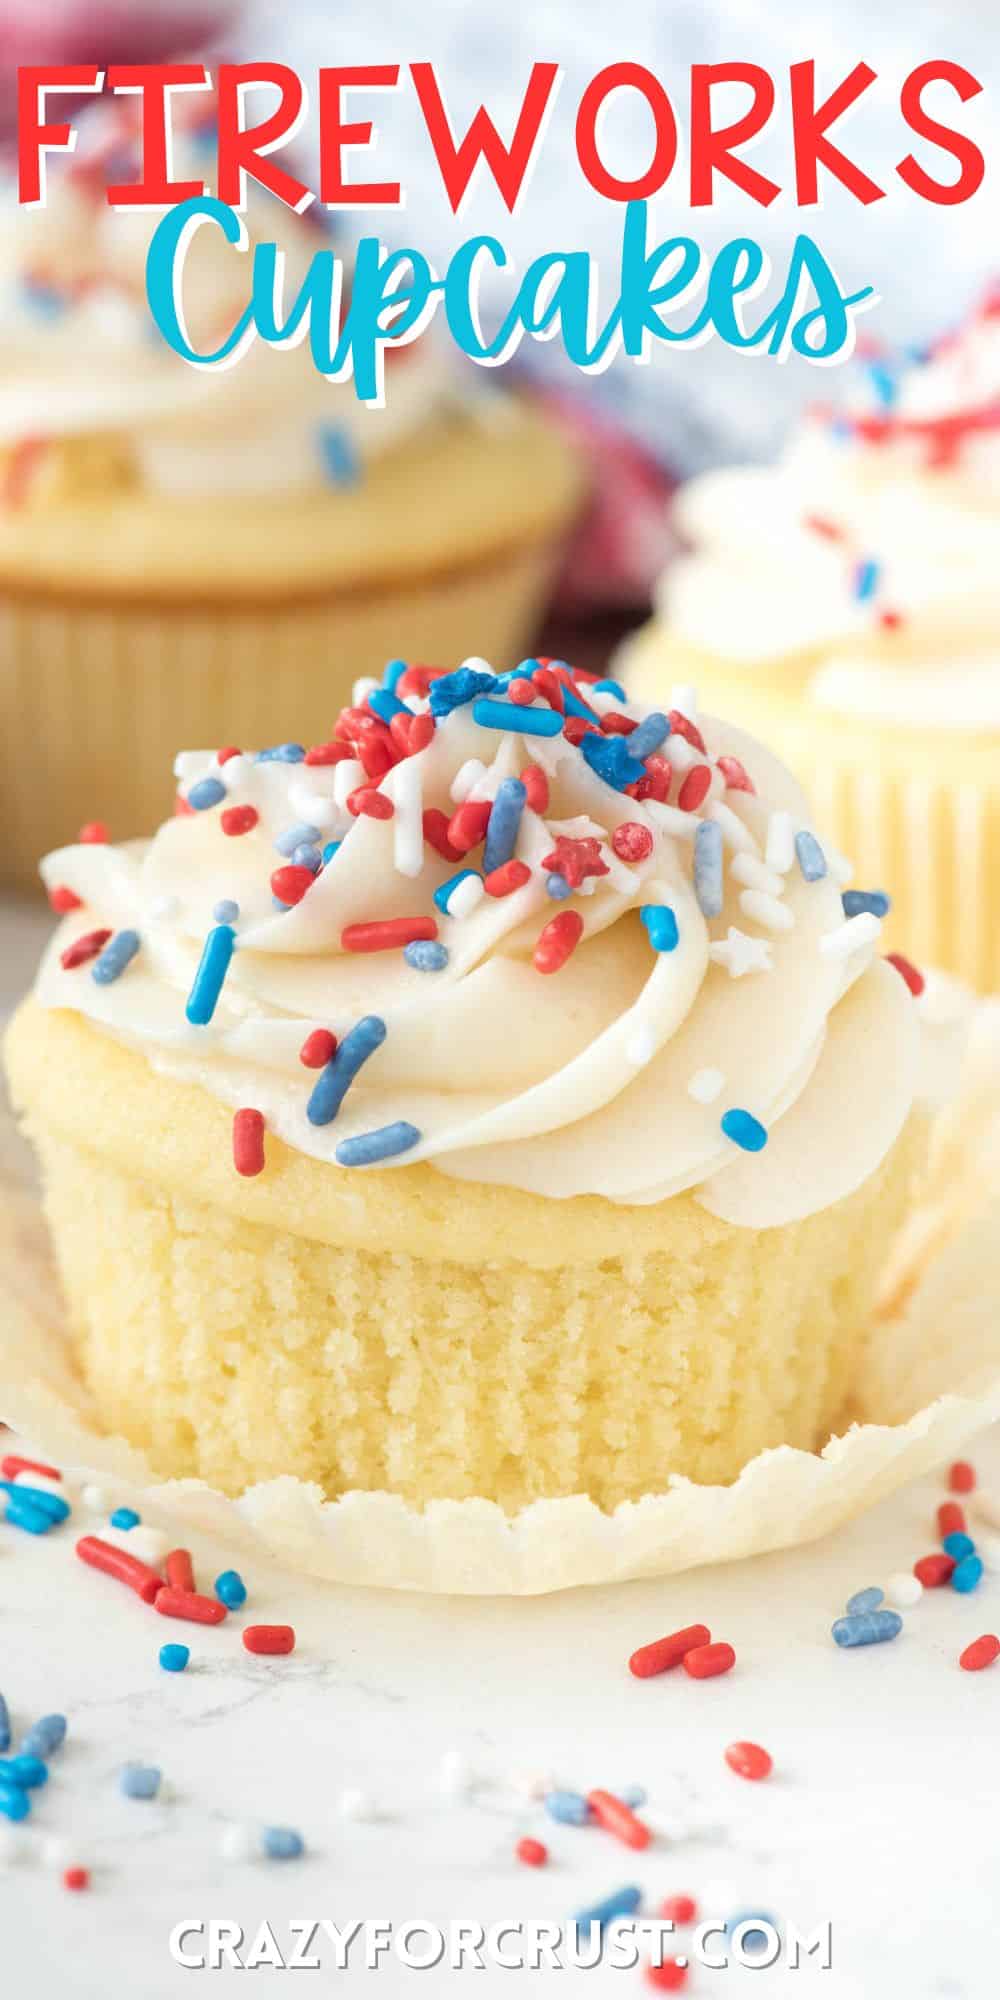 cupcakes covered in red white and blue sprinkles and white frosting words on the image.